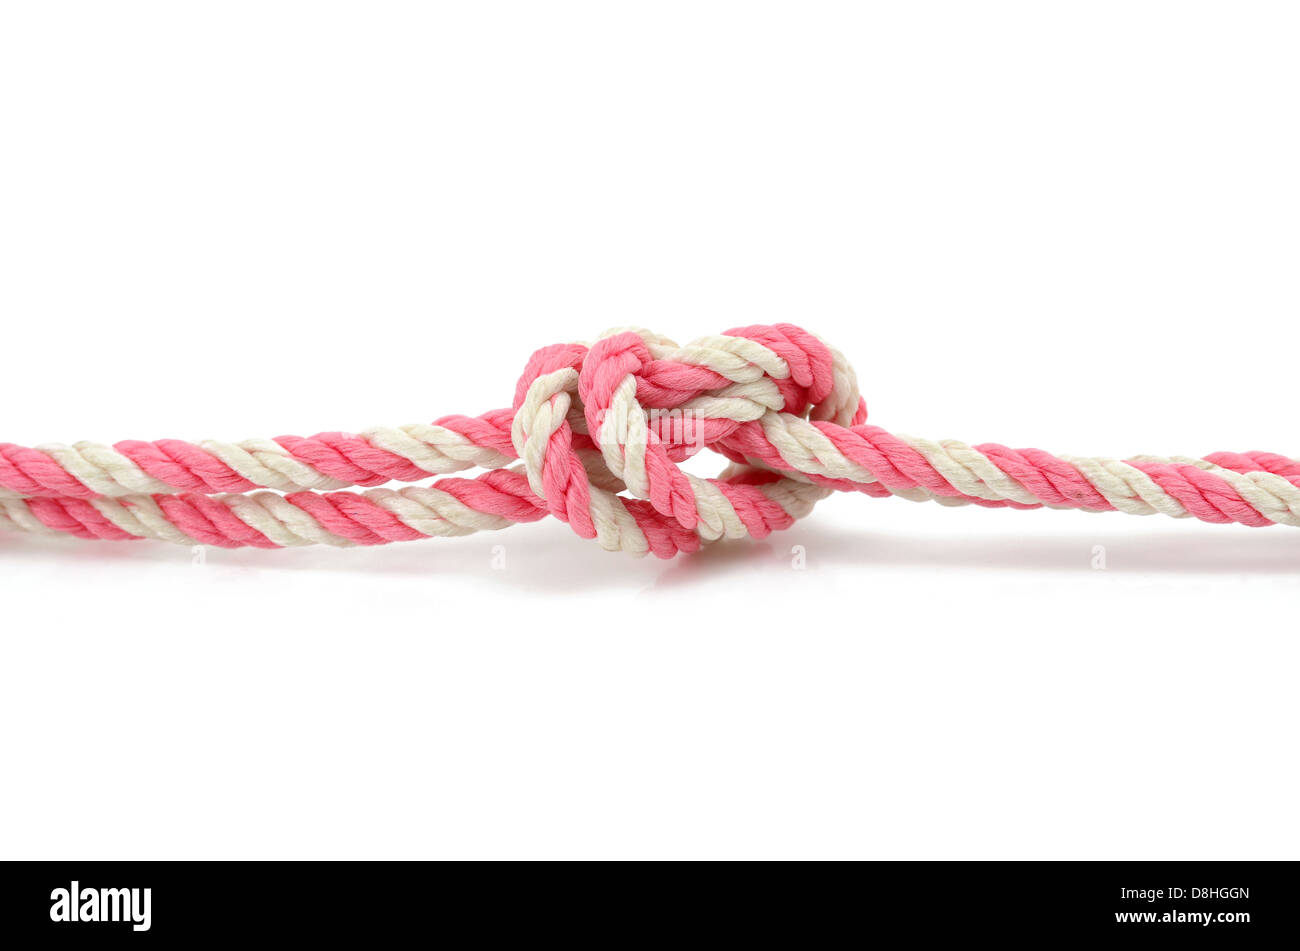 Closeup of a rope with a knot Stock Photo